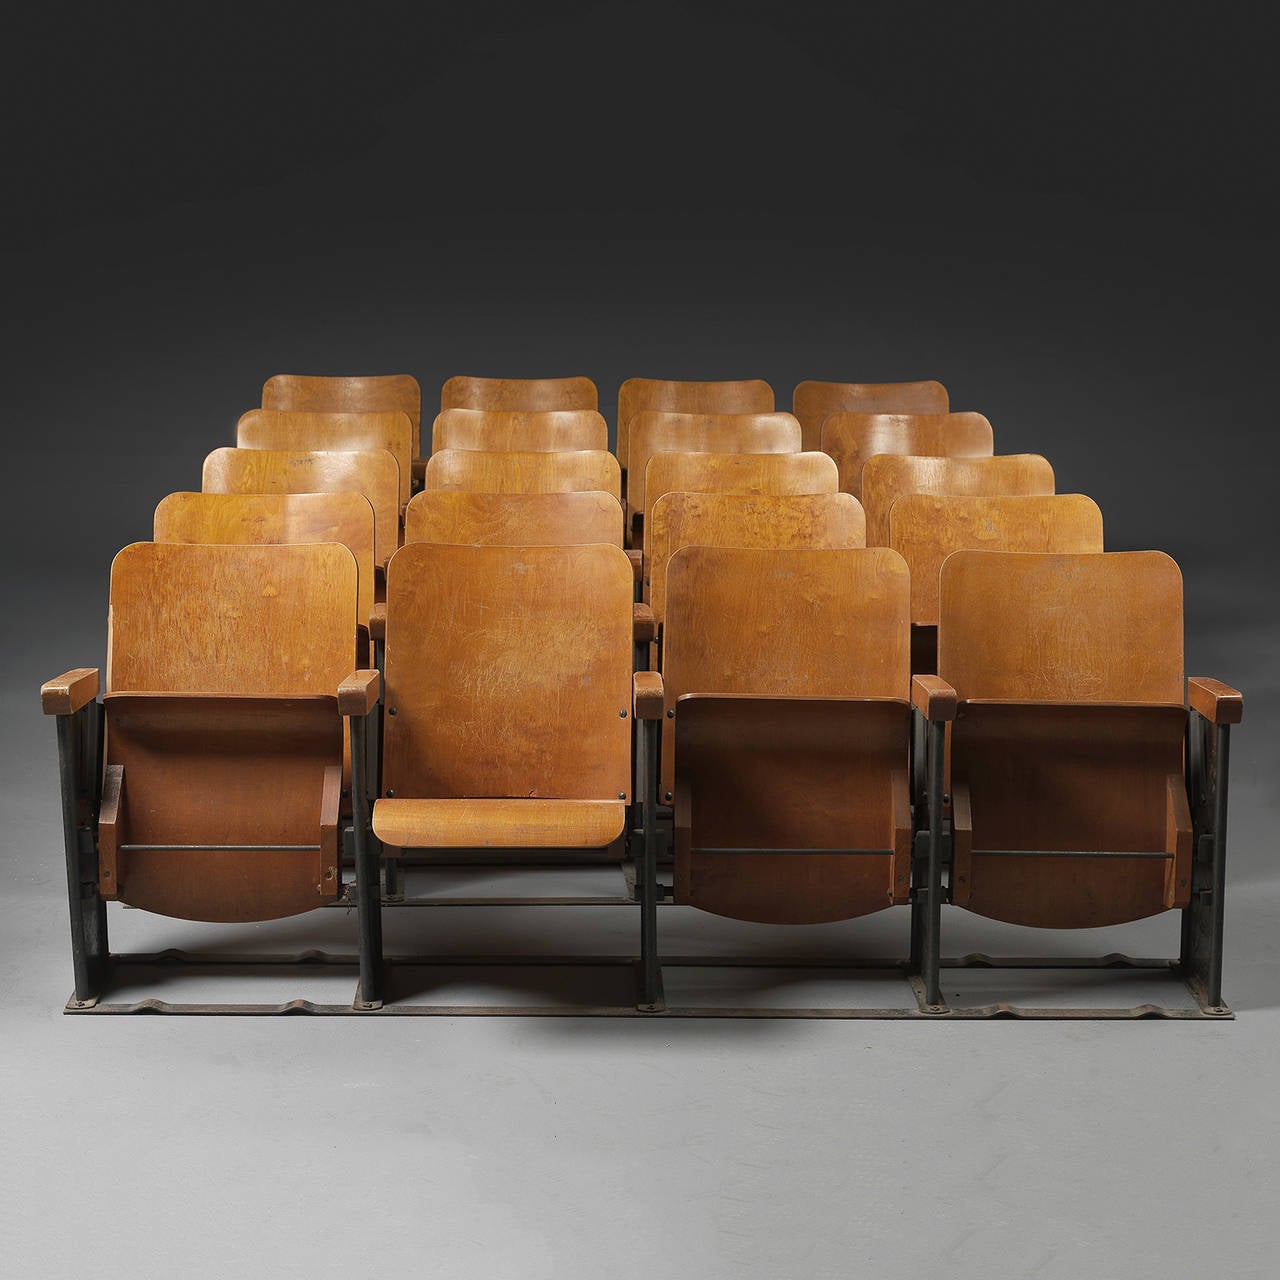 1950s Movie Theater Armchairs, From a Military Base 2